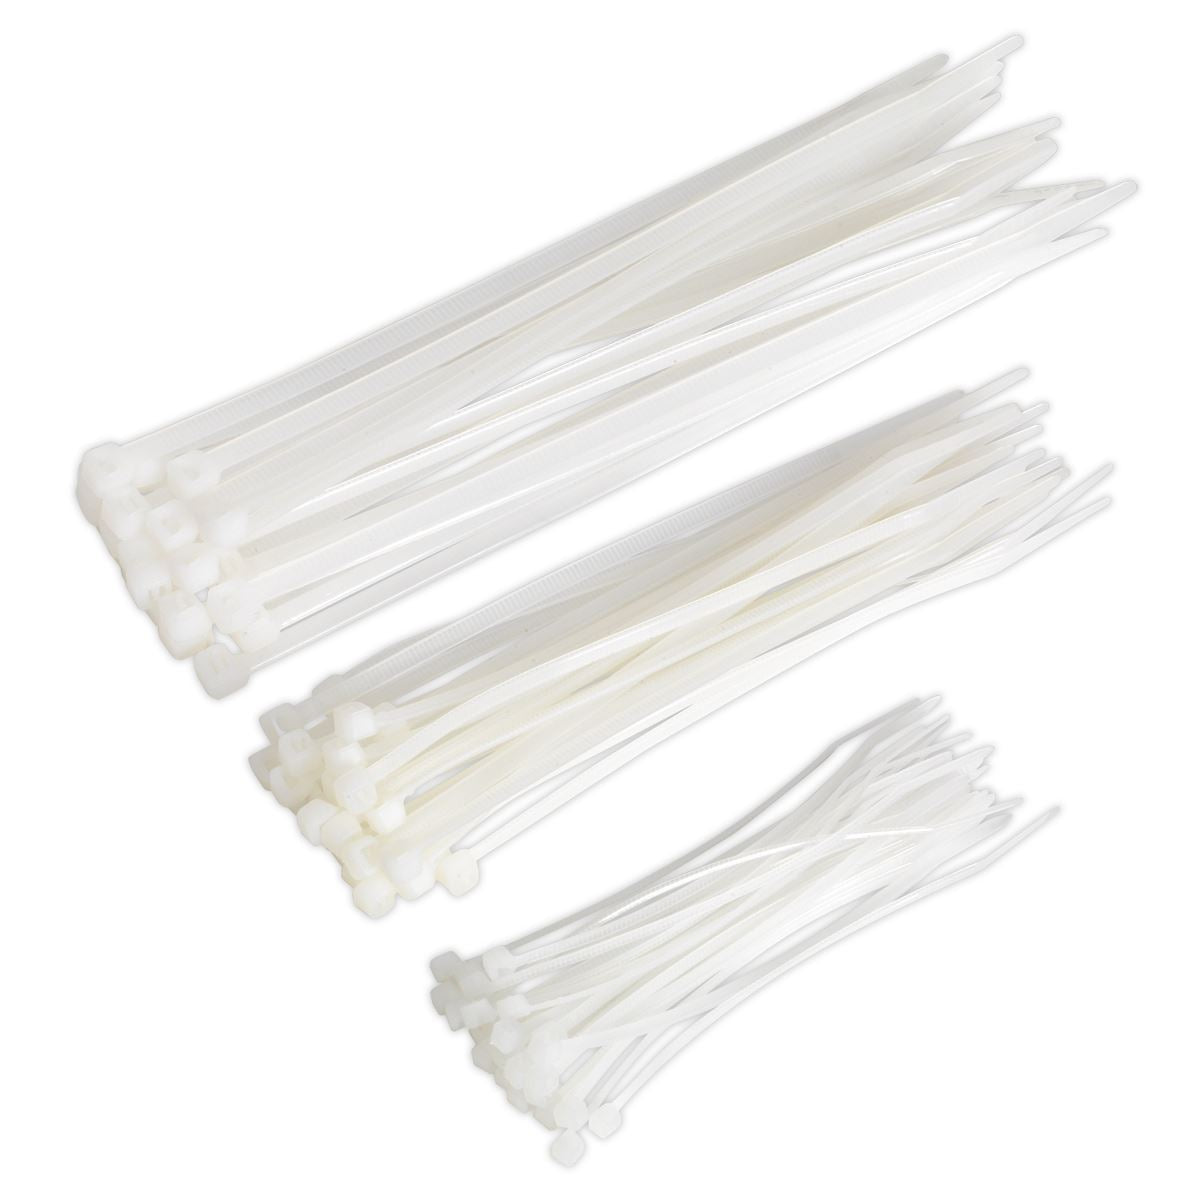 Sealey Cable Tie Assortment White Pack of 75